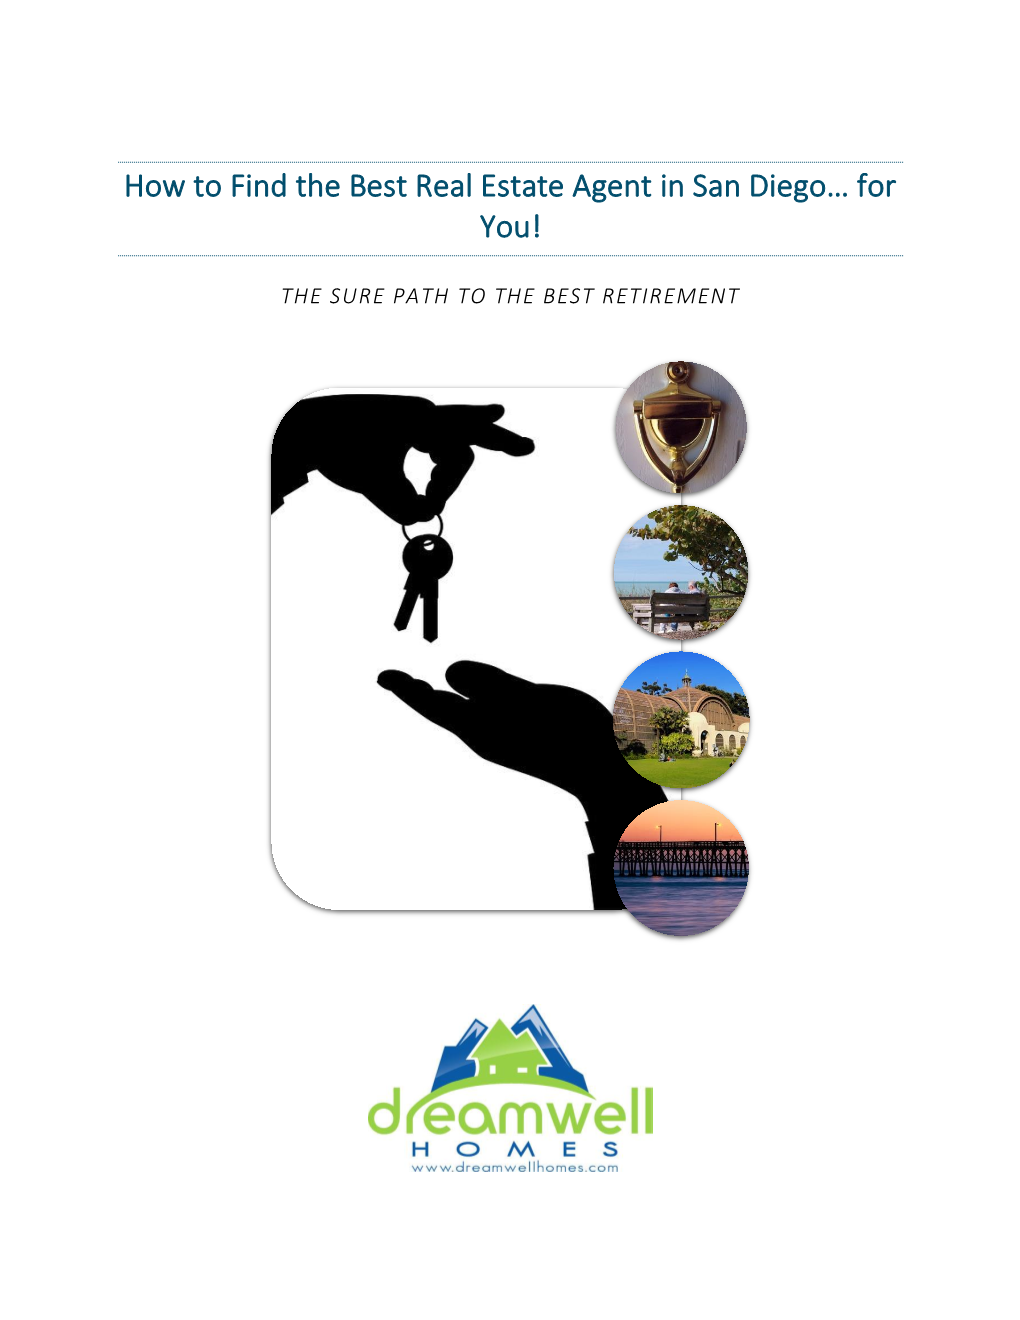 How to Find the Best Real Estate Agent in San Diego… for You!